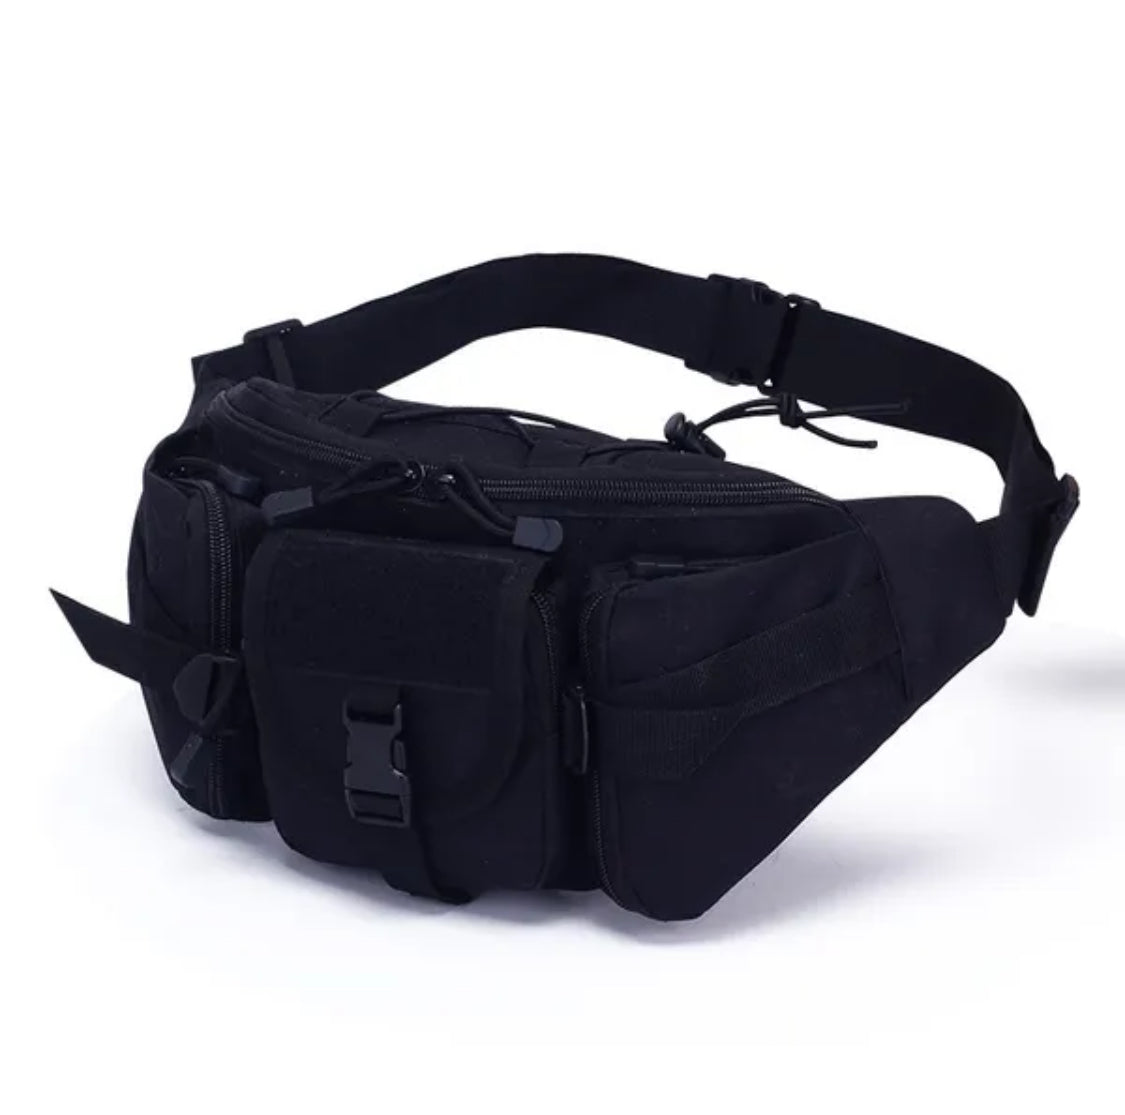 Waterproof Tactical Bait Pouch. Stalking Angler Belt Pouch